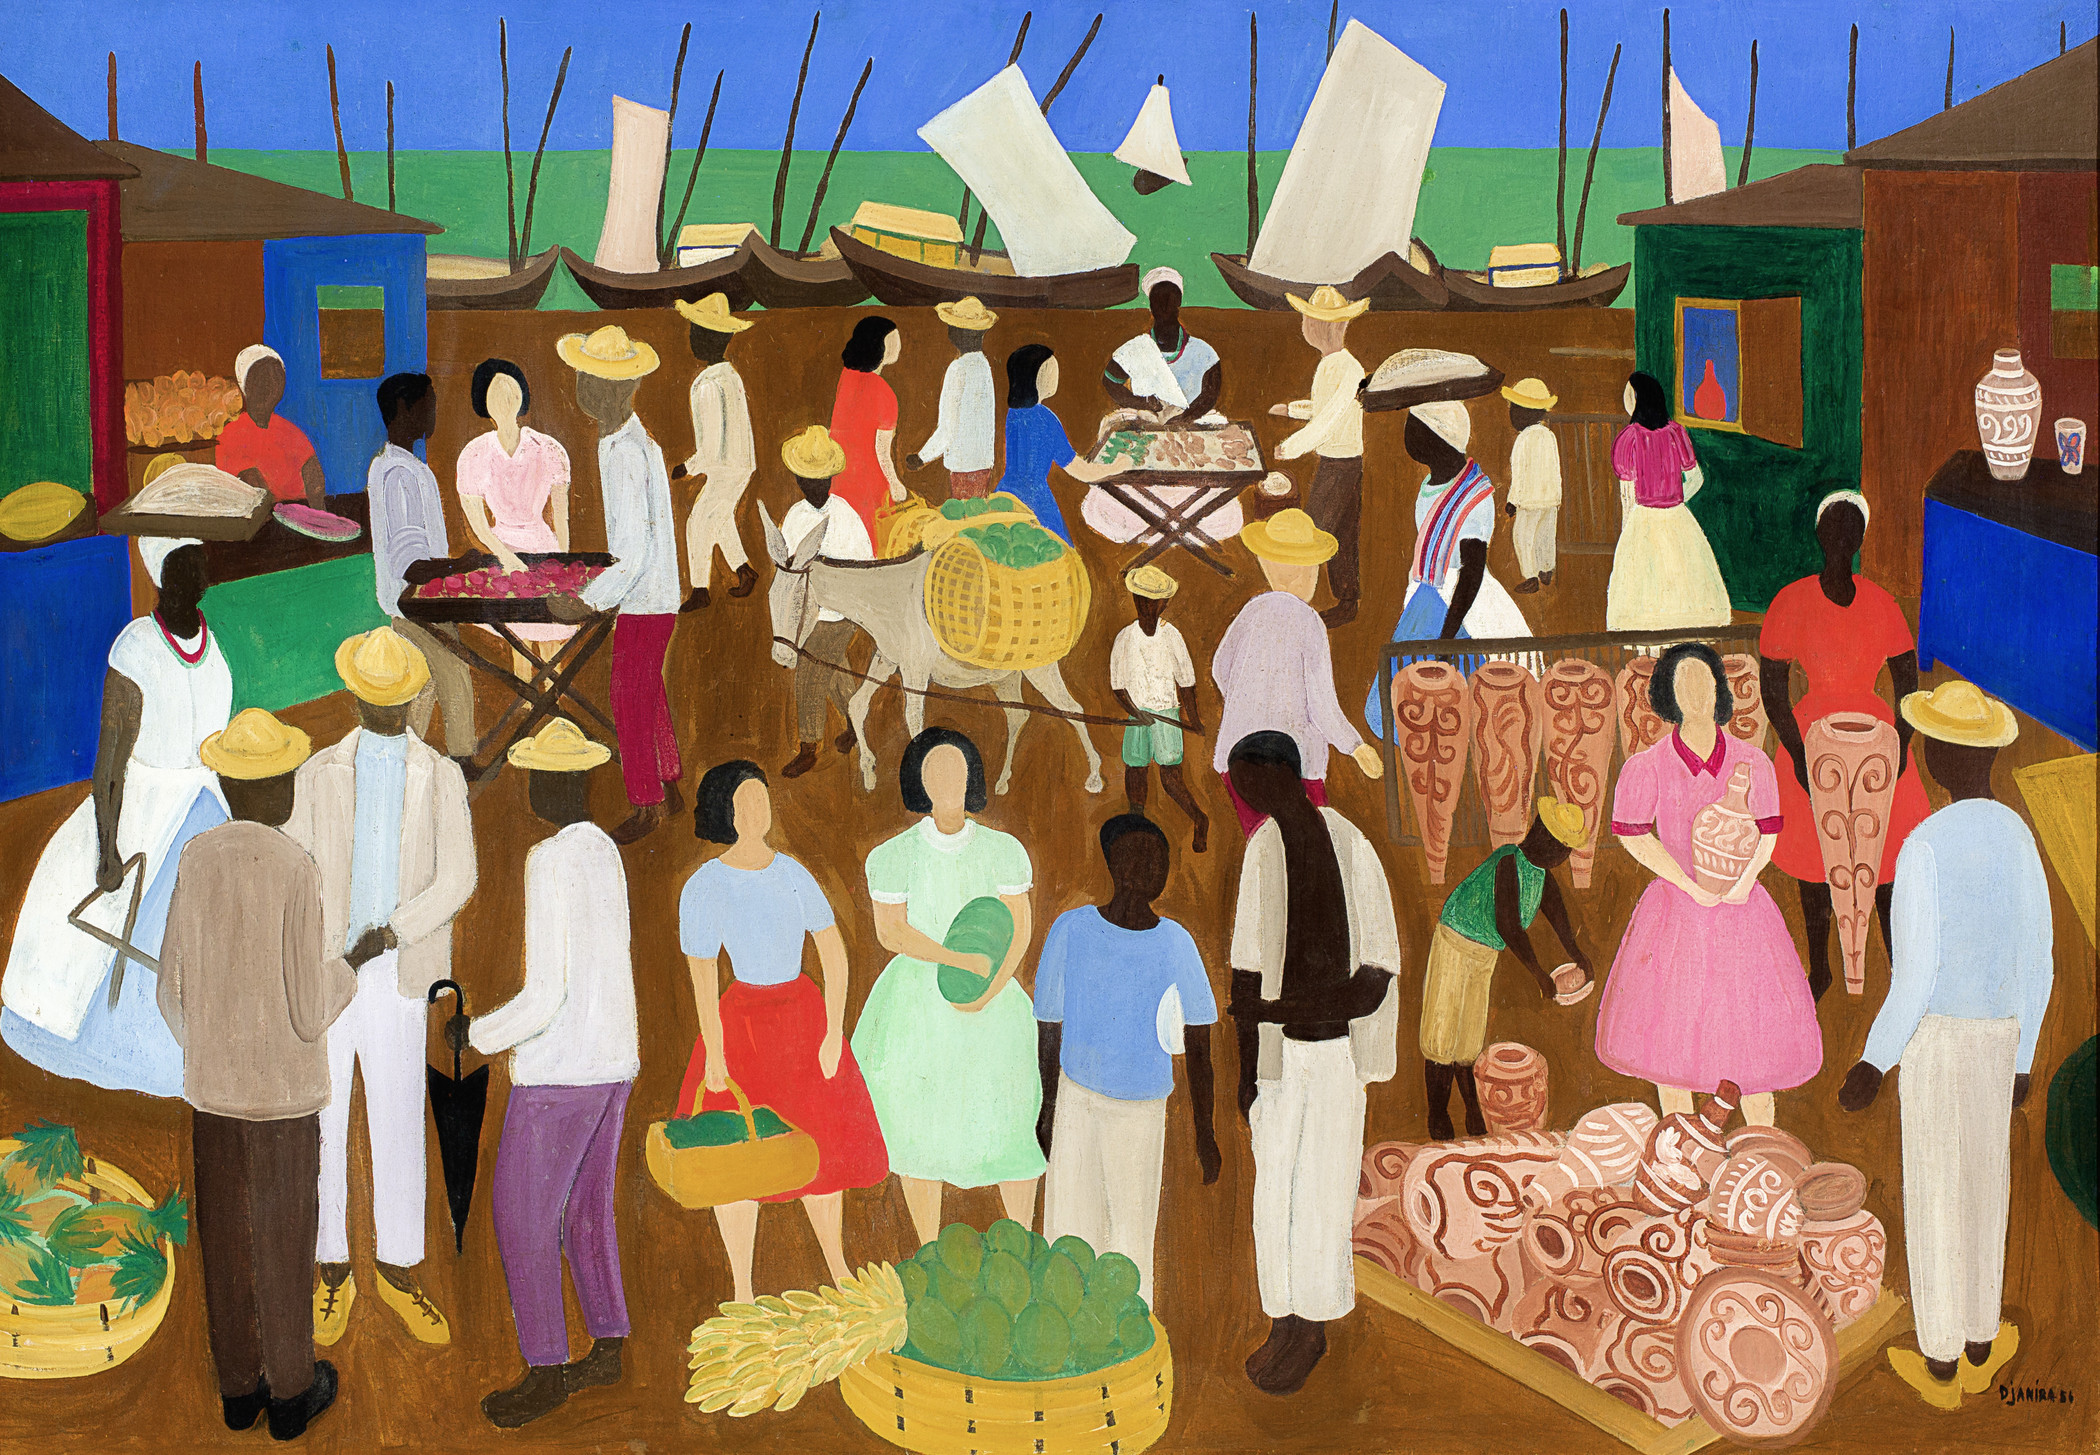 Colorful painting of outdoor market with goods and people, with ocean and boats in the background